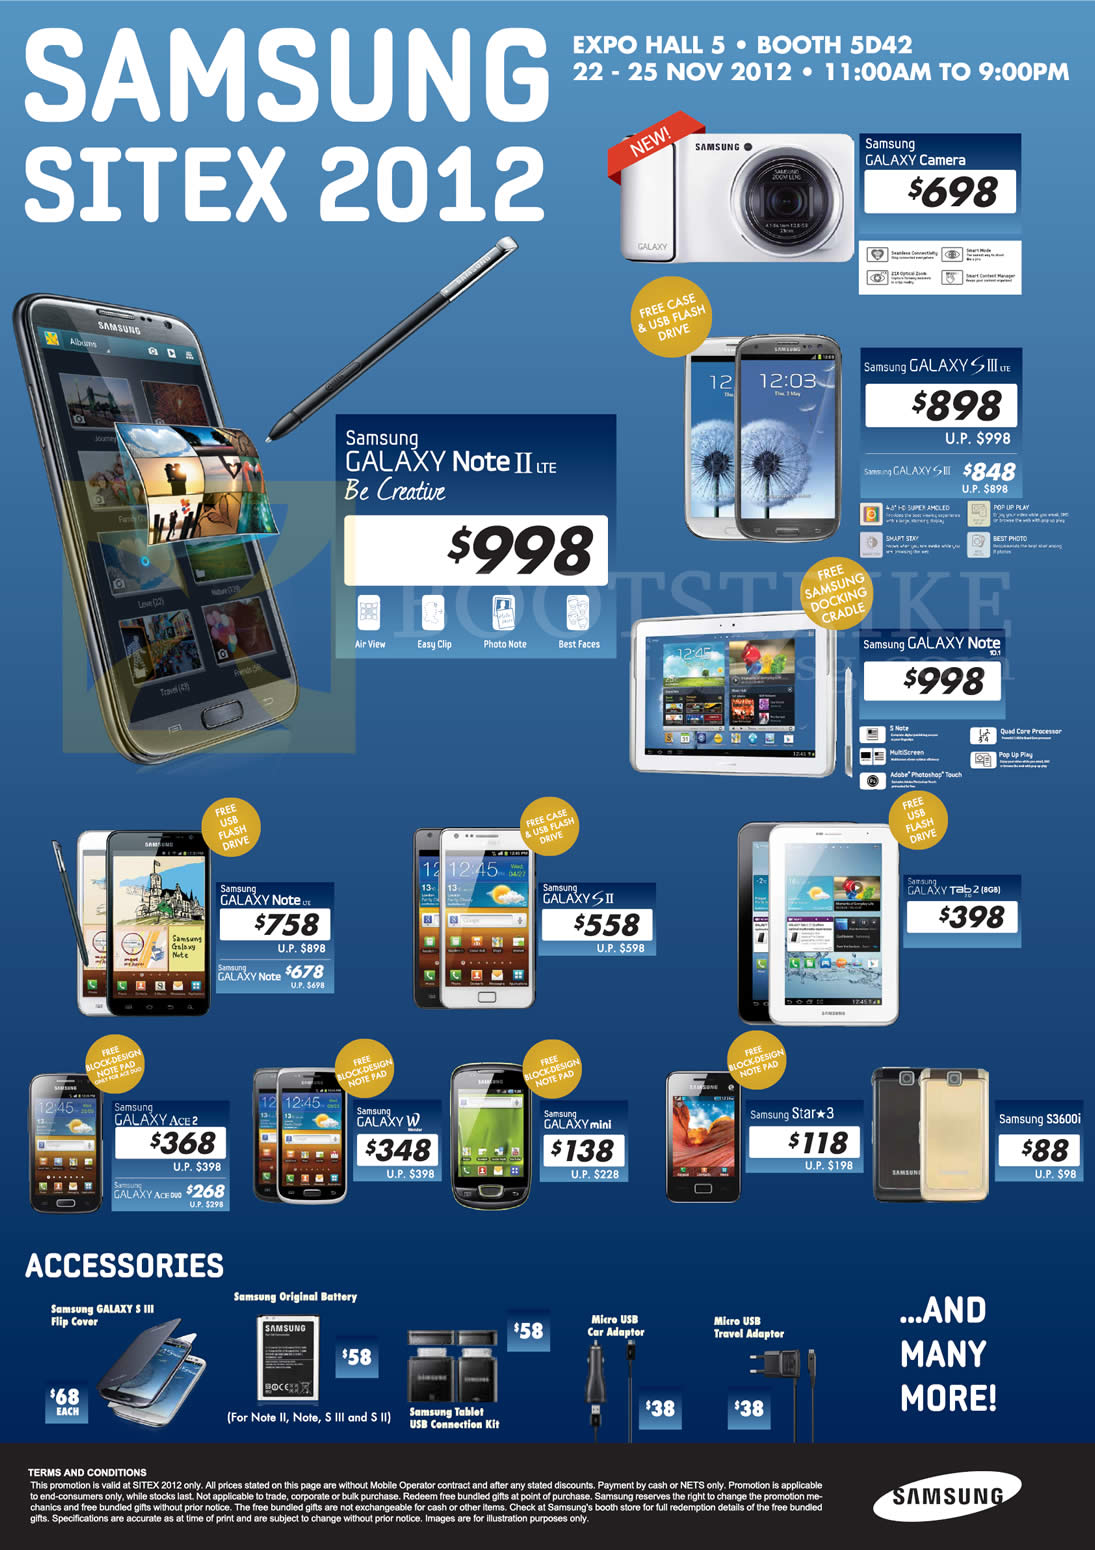 SITEX 2012 price list image brochure of Planet Telecoms Samsung Mobile Phones Galaxy Camera, S III LTE, Note II LTE, Note 10.1, Note LTE, S II, Tab 2 7.0, Ace 2, W, Mini, Star 3, S3600i, Accessories